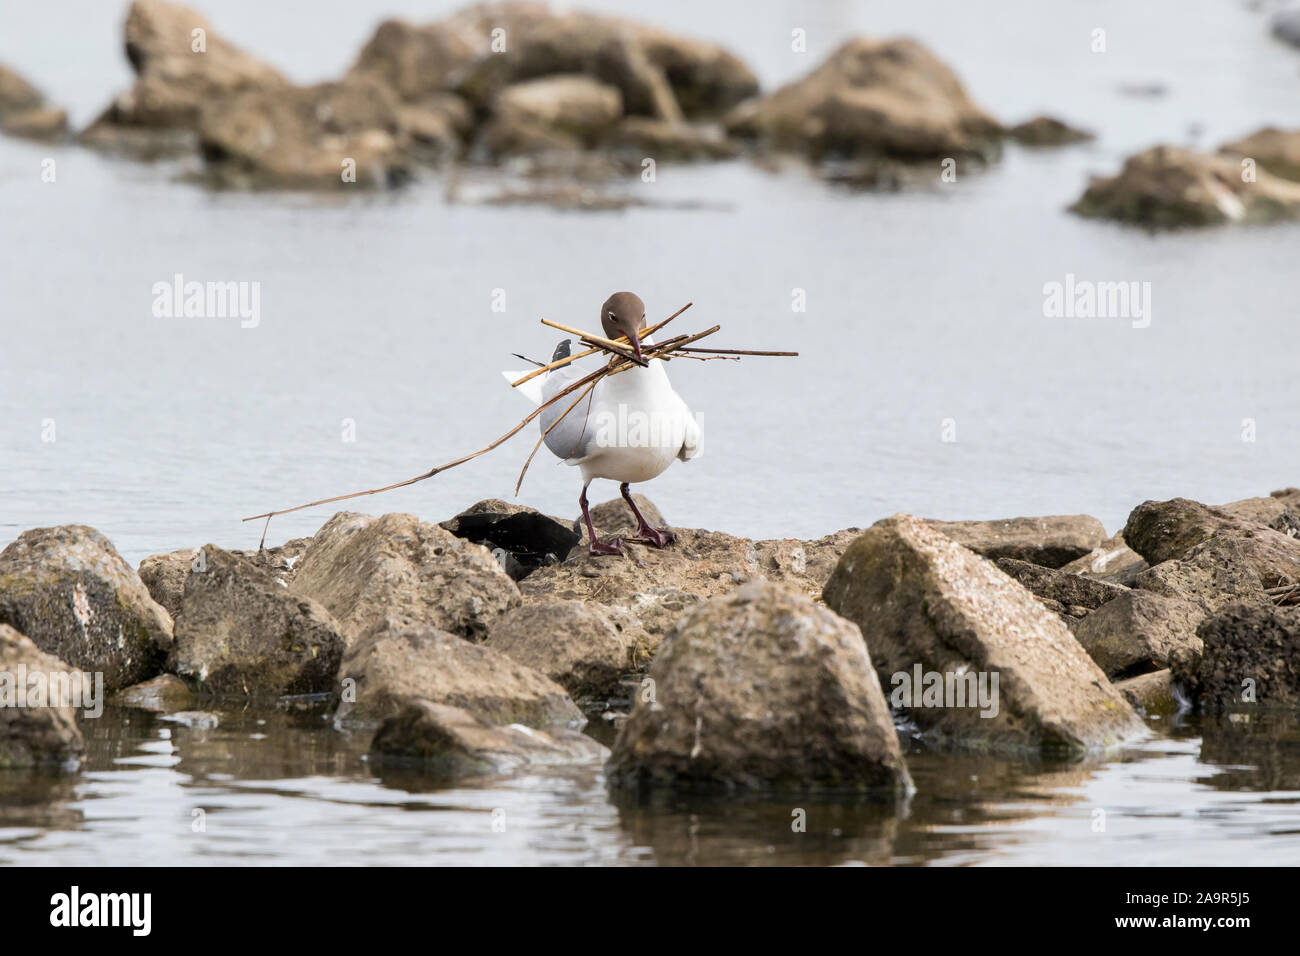 Black-headed gull (Chroicocephalus ridibundus) standing with a beak full of nesting material isolated outdoors at a wetlands nature reserve, UK. Stock Photo